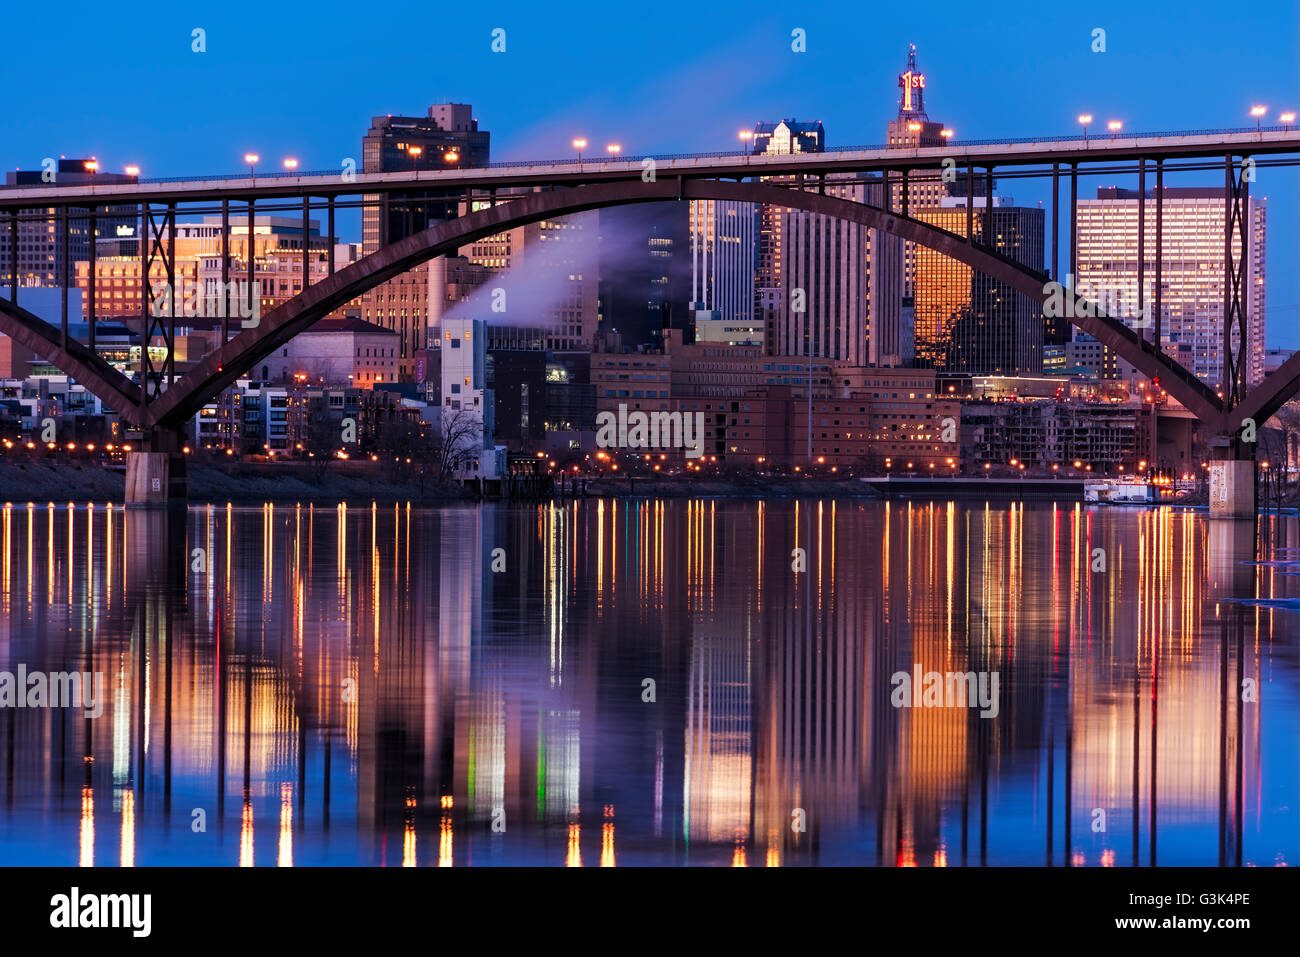 Saint Paul, Minnesota skyline and reflection at dusk with the Smith Ave High Bridge in the foreground. Stock Photo